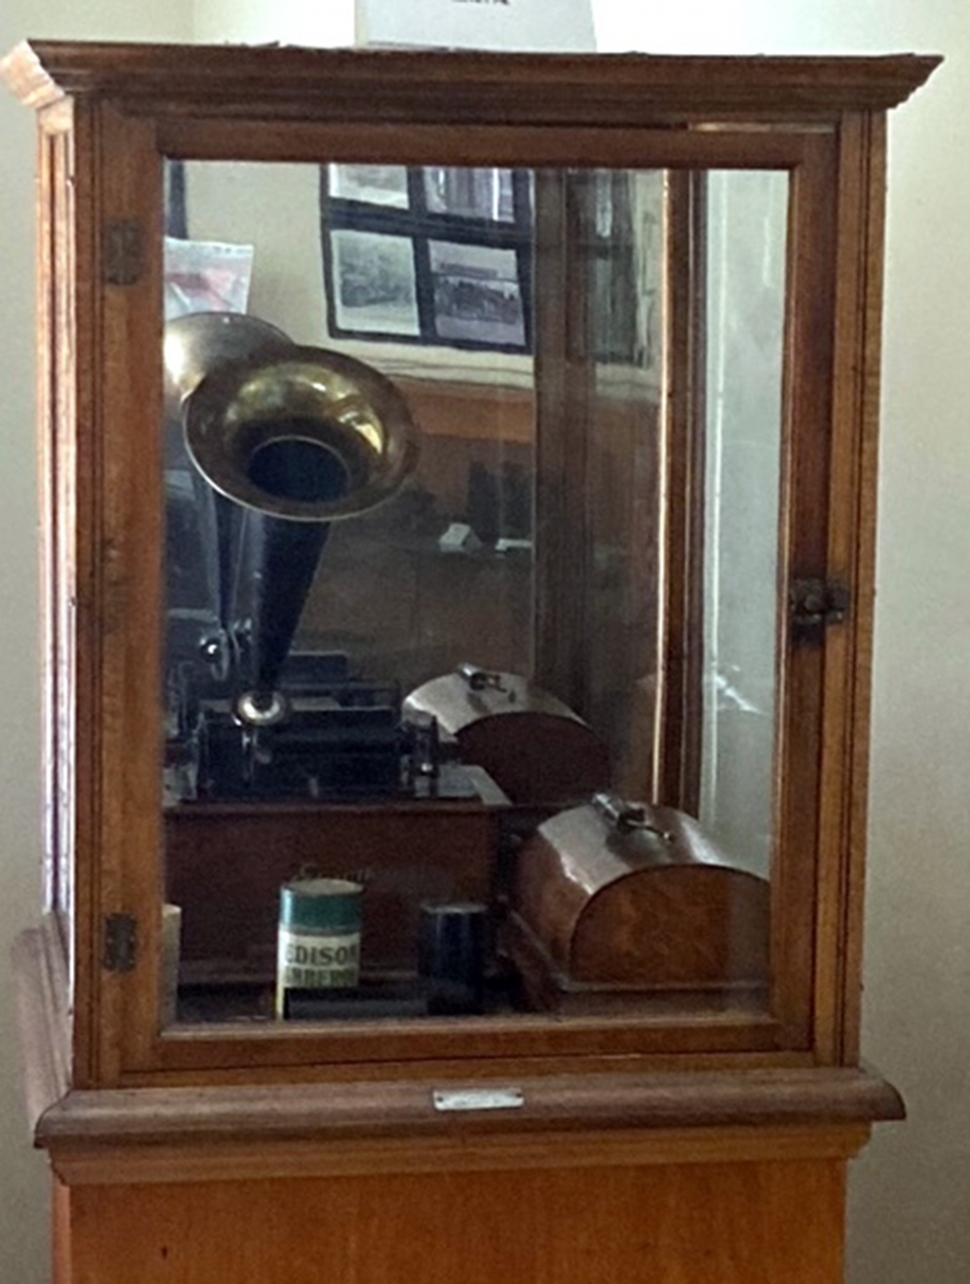 Pictured above is an Edison Cylinder player, the earliest is an Edison “Standard” cylinder player they were popular between 1898 - 1913, there ahs been one in the Museum from after 1908 since it plays a 4-minute cylinder.